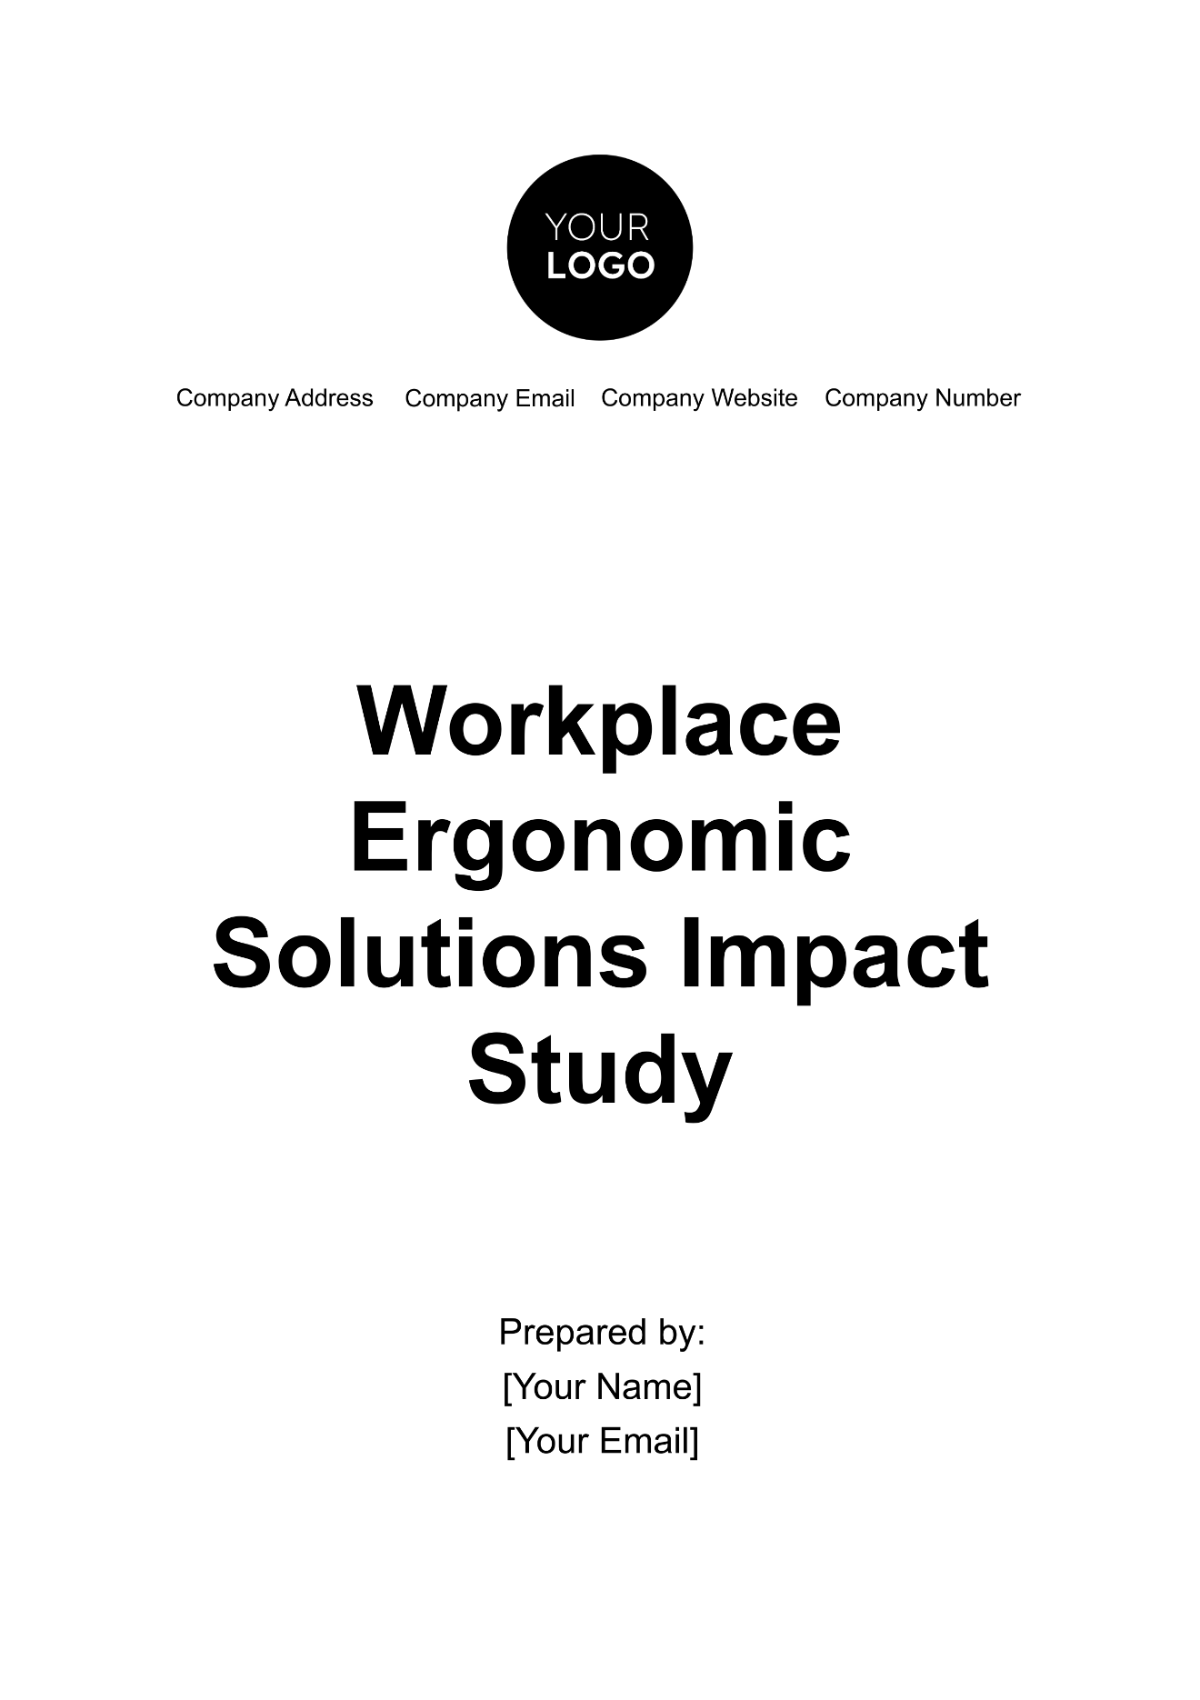 Workplace Ergonomic Solutions Impact Study Template